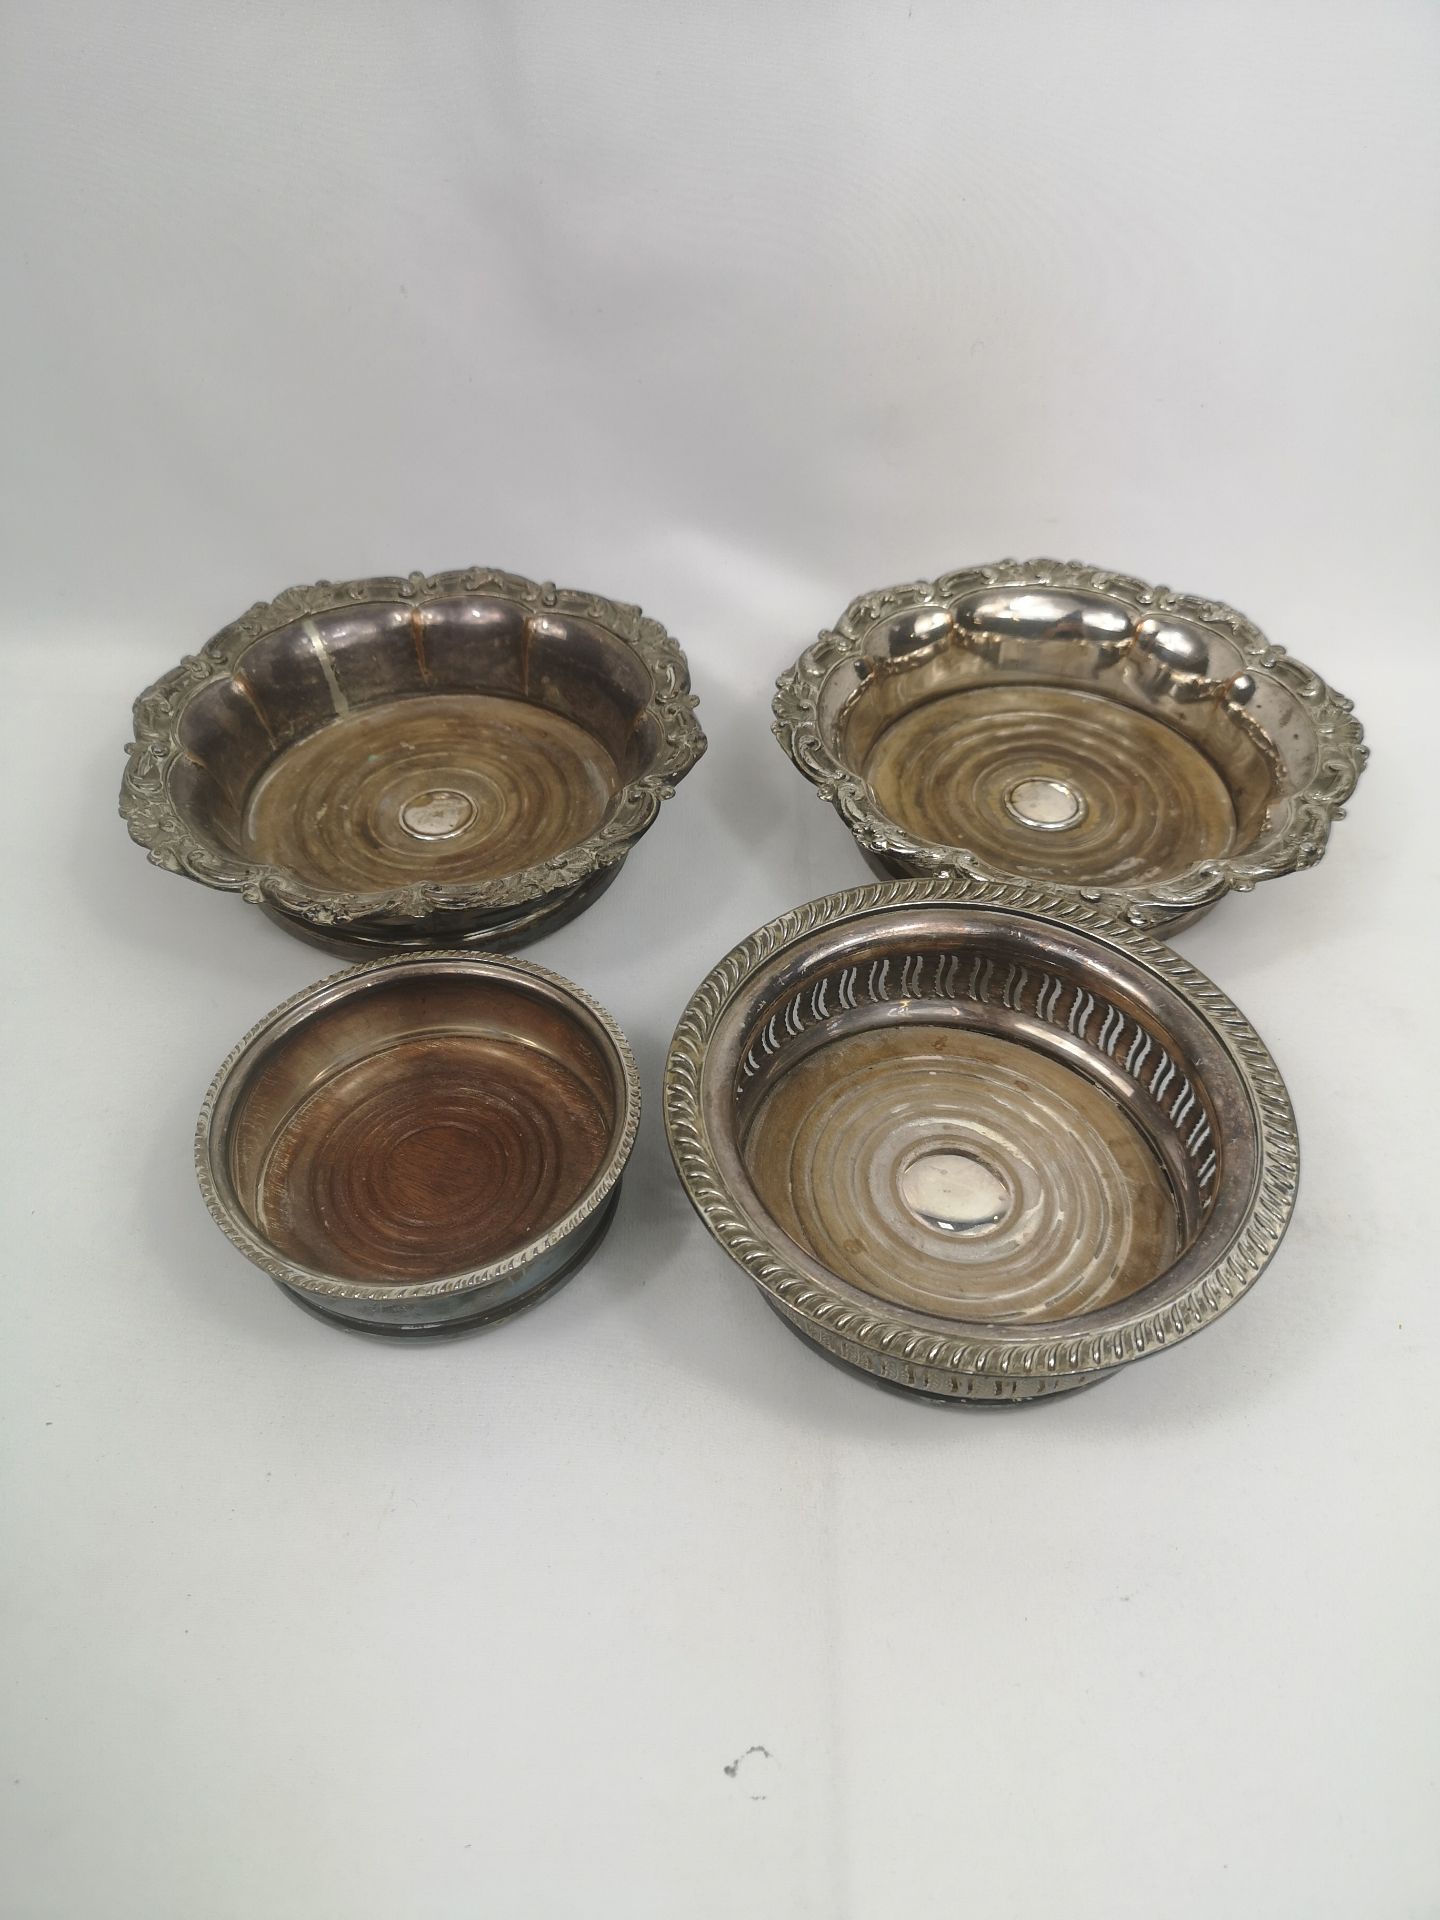 Pair of Sheffield plate bottle coasters together with a silver plate coaster